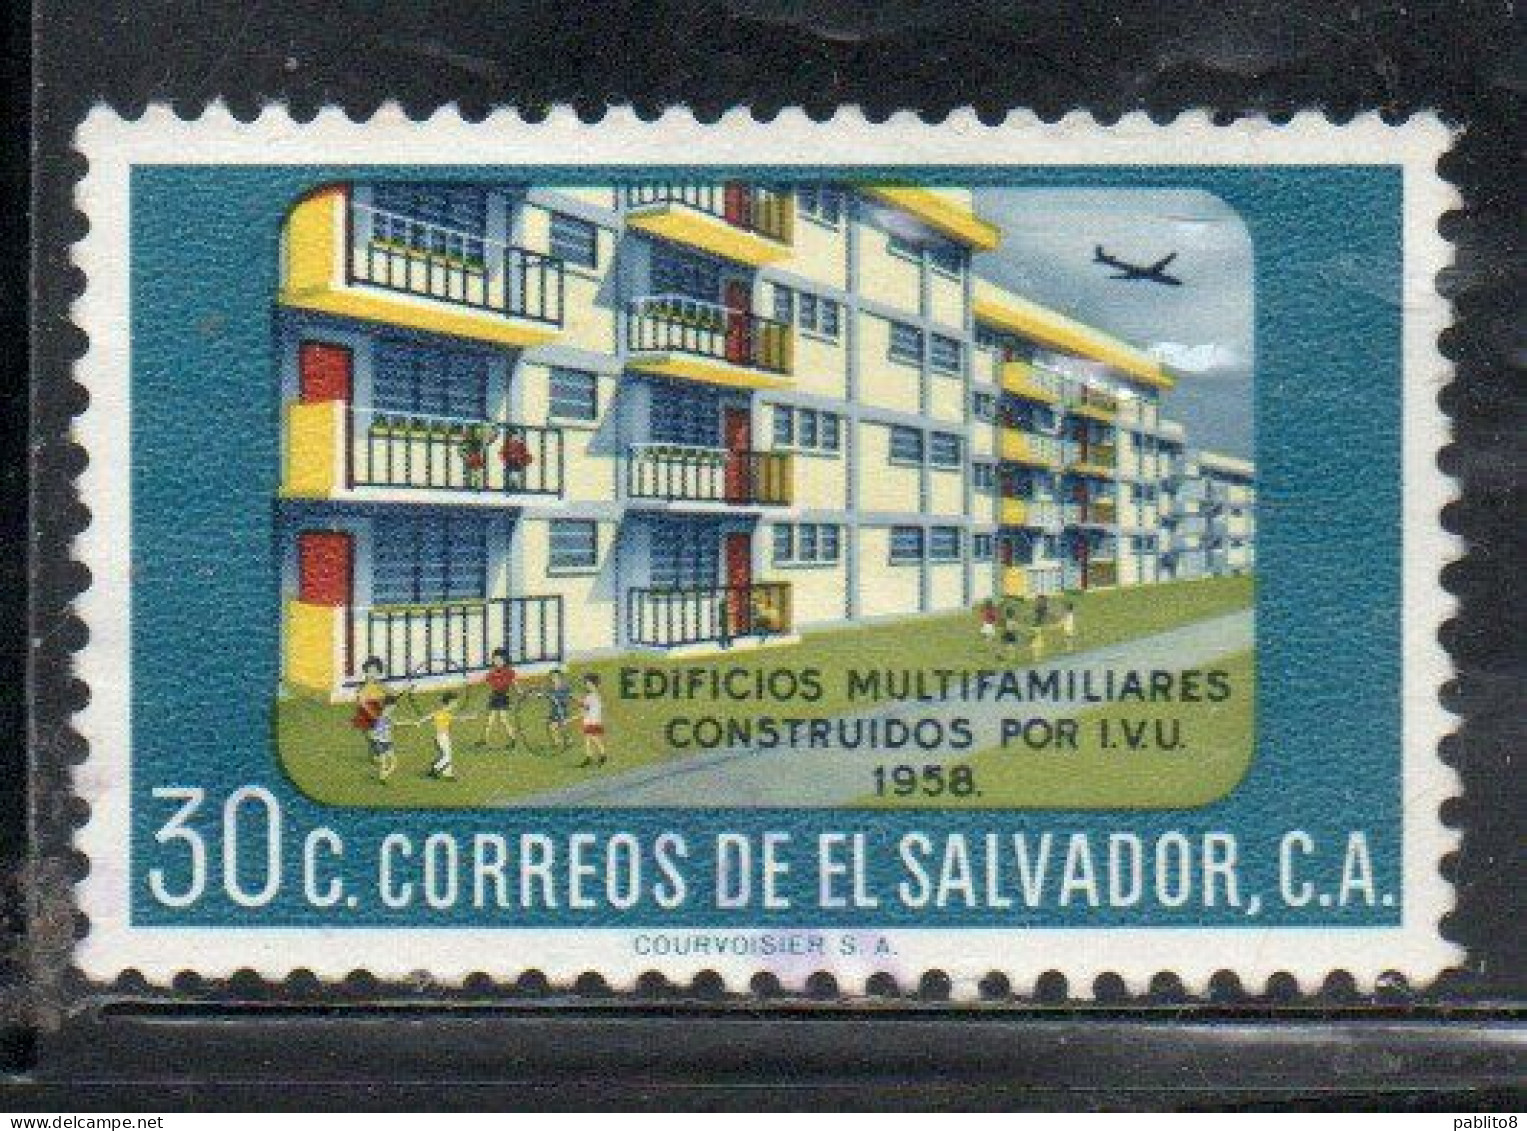 EL SALVADOR 1971 MULTIFAMILY HOUSING PROJECTS APARTMENT HOUSES 30c MH - Salvador